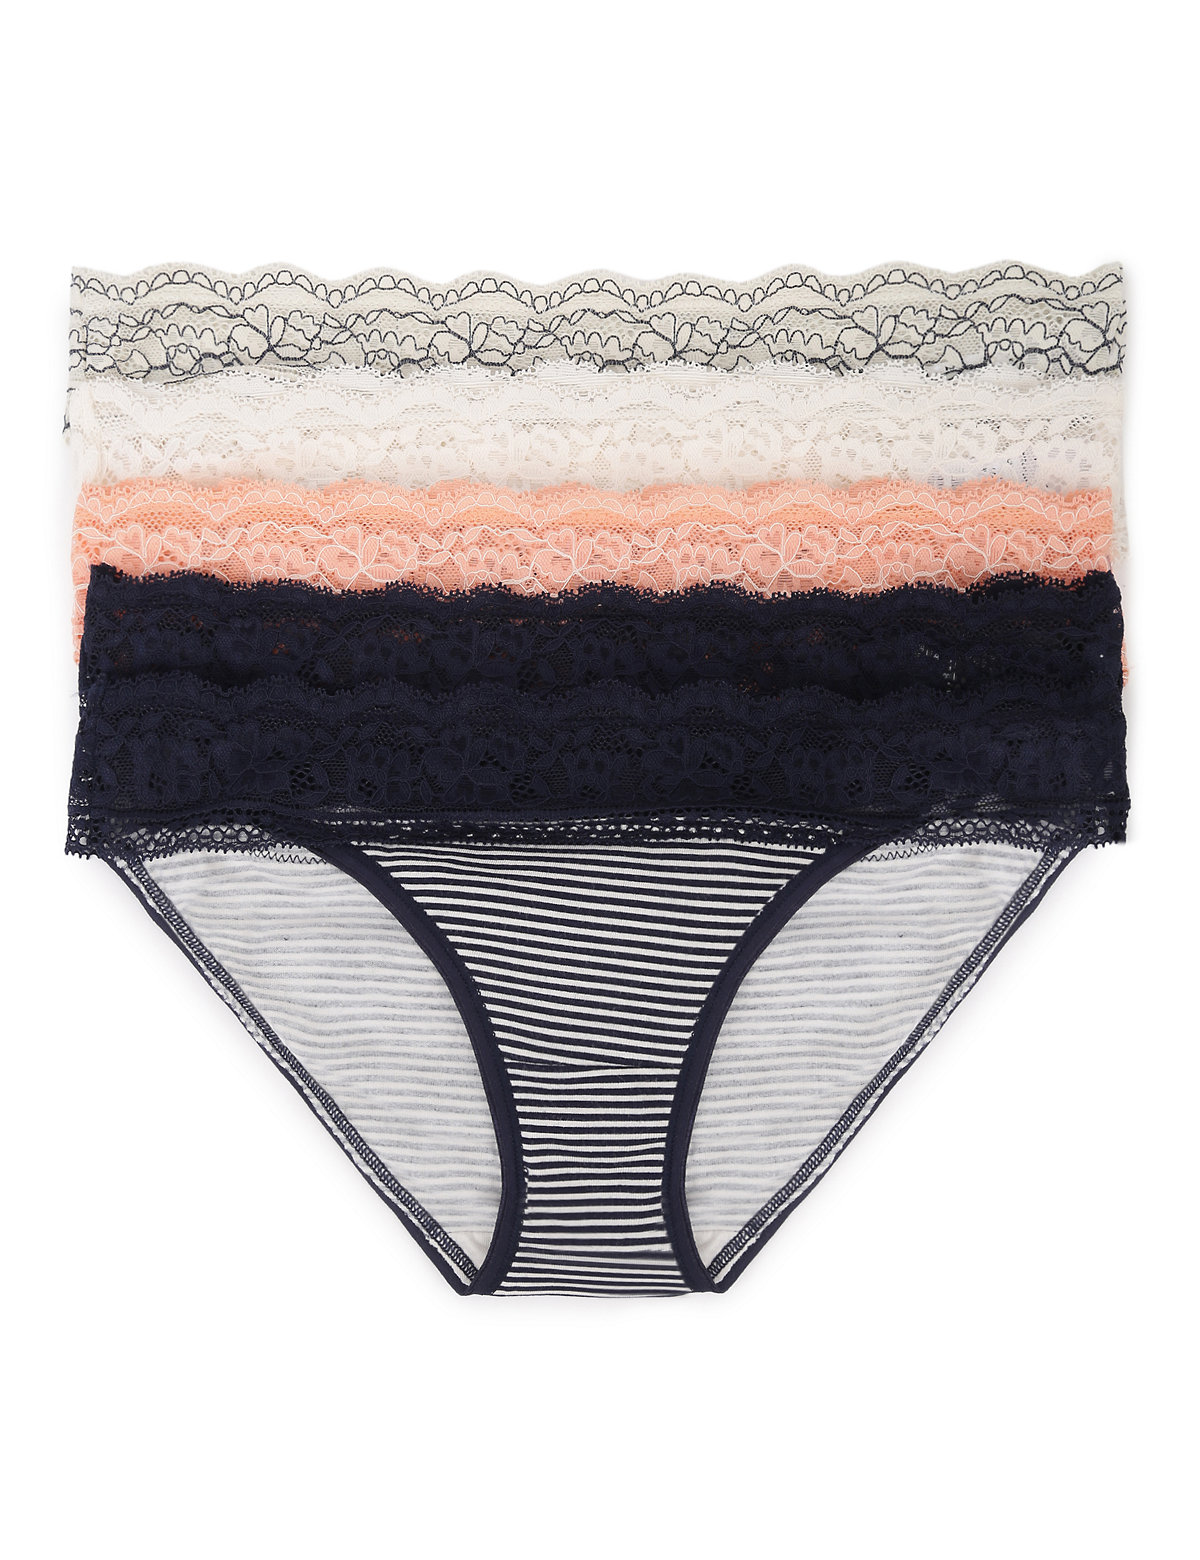 Pack of 5 Printed Lace Trim Knickers